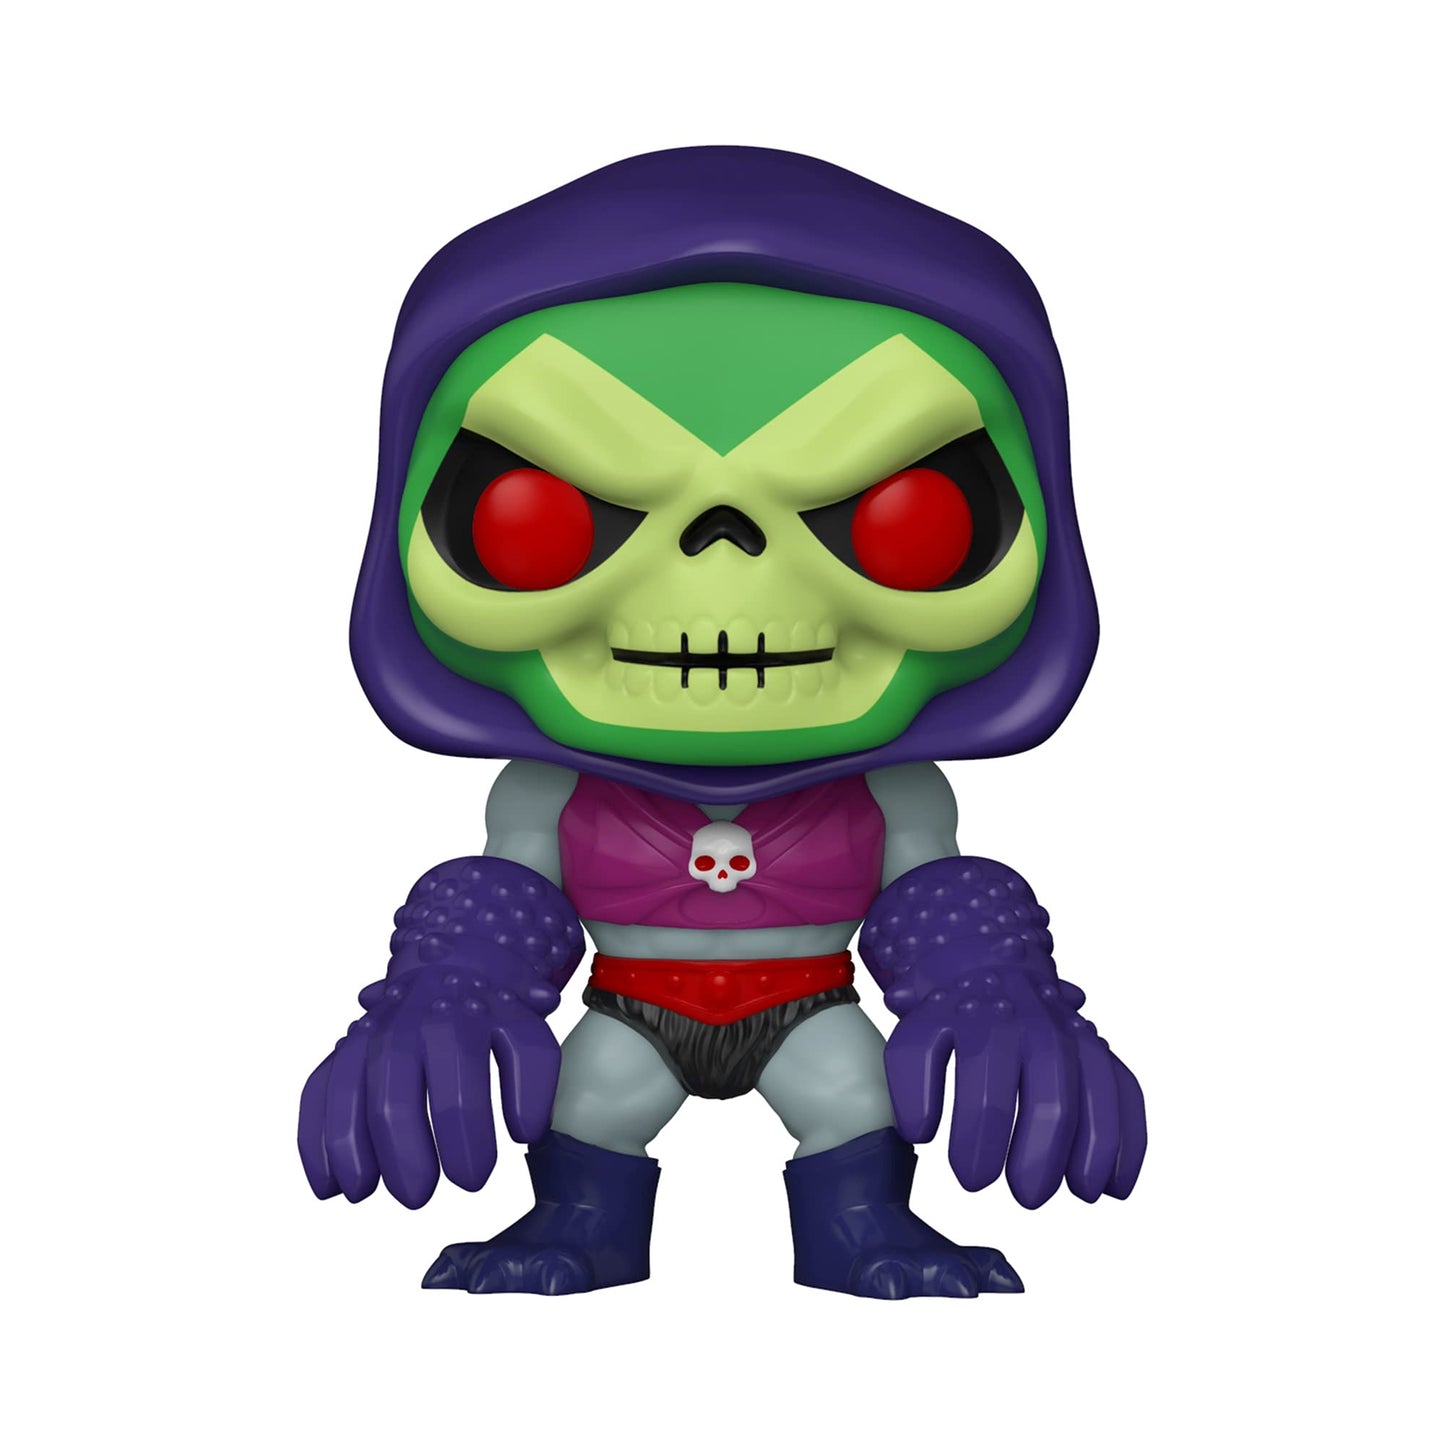 Funko Pop!: Masters of The Universe - Skeltor with Terror Claws, Multicolor